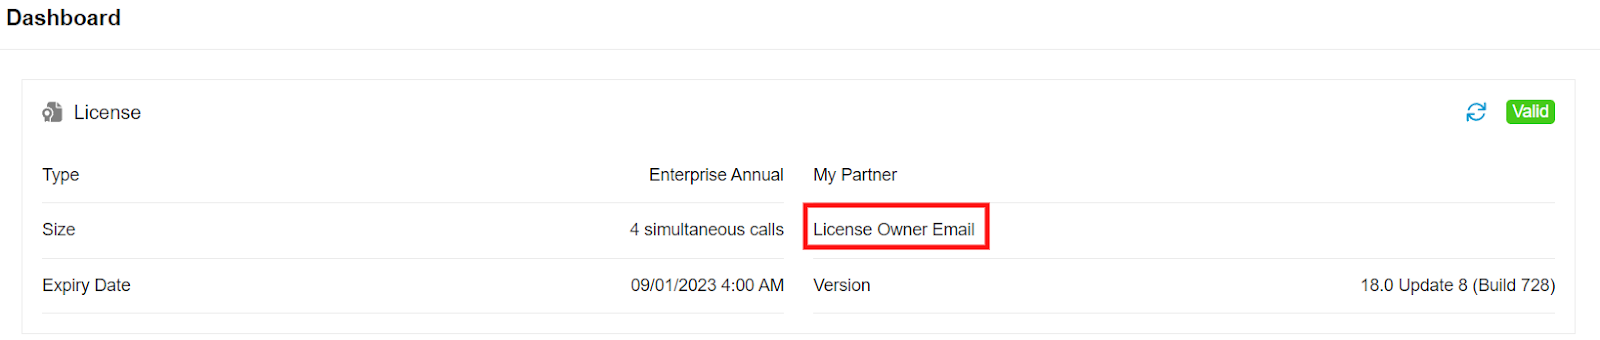 Web Client Update 8 - License Owner Email